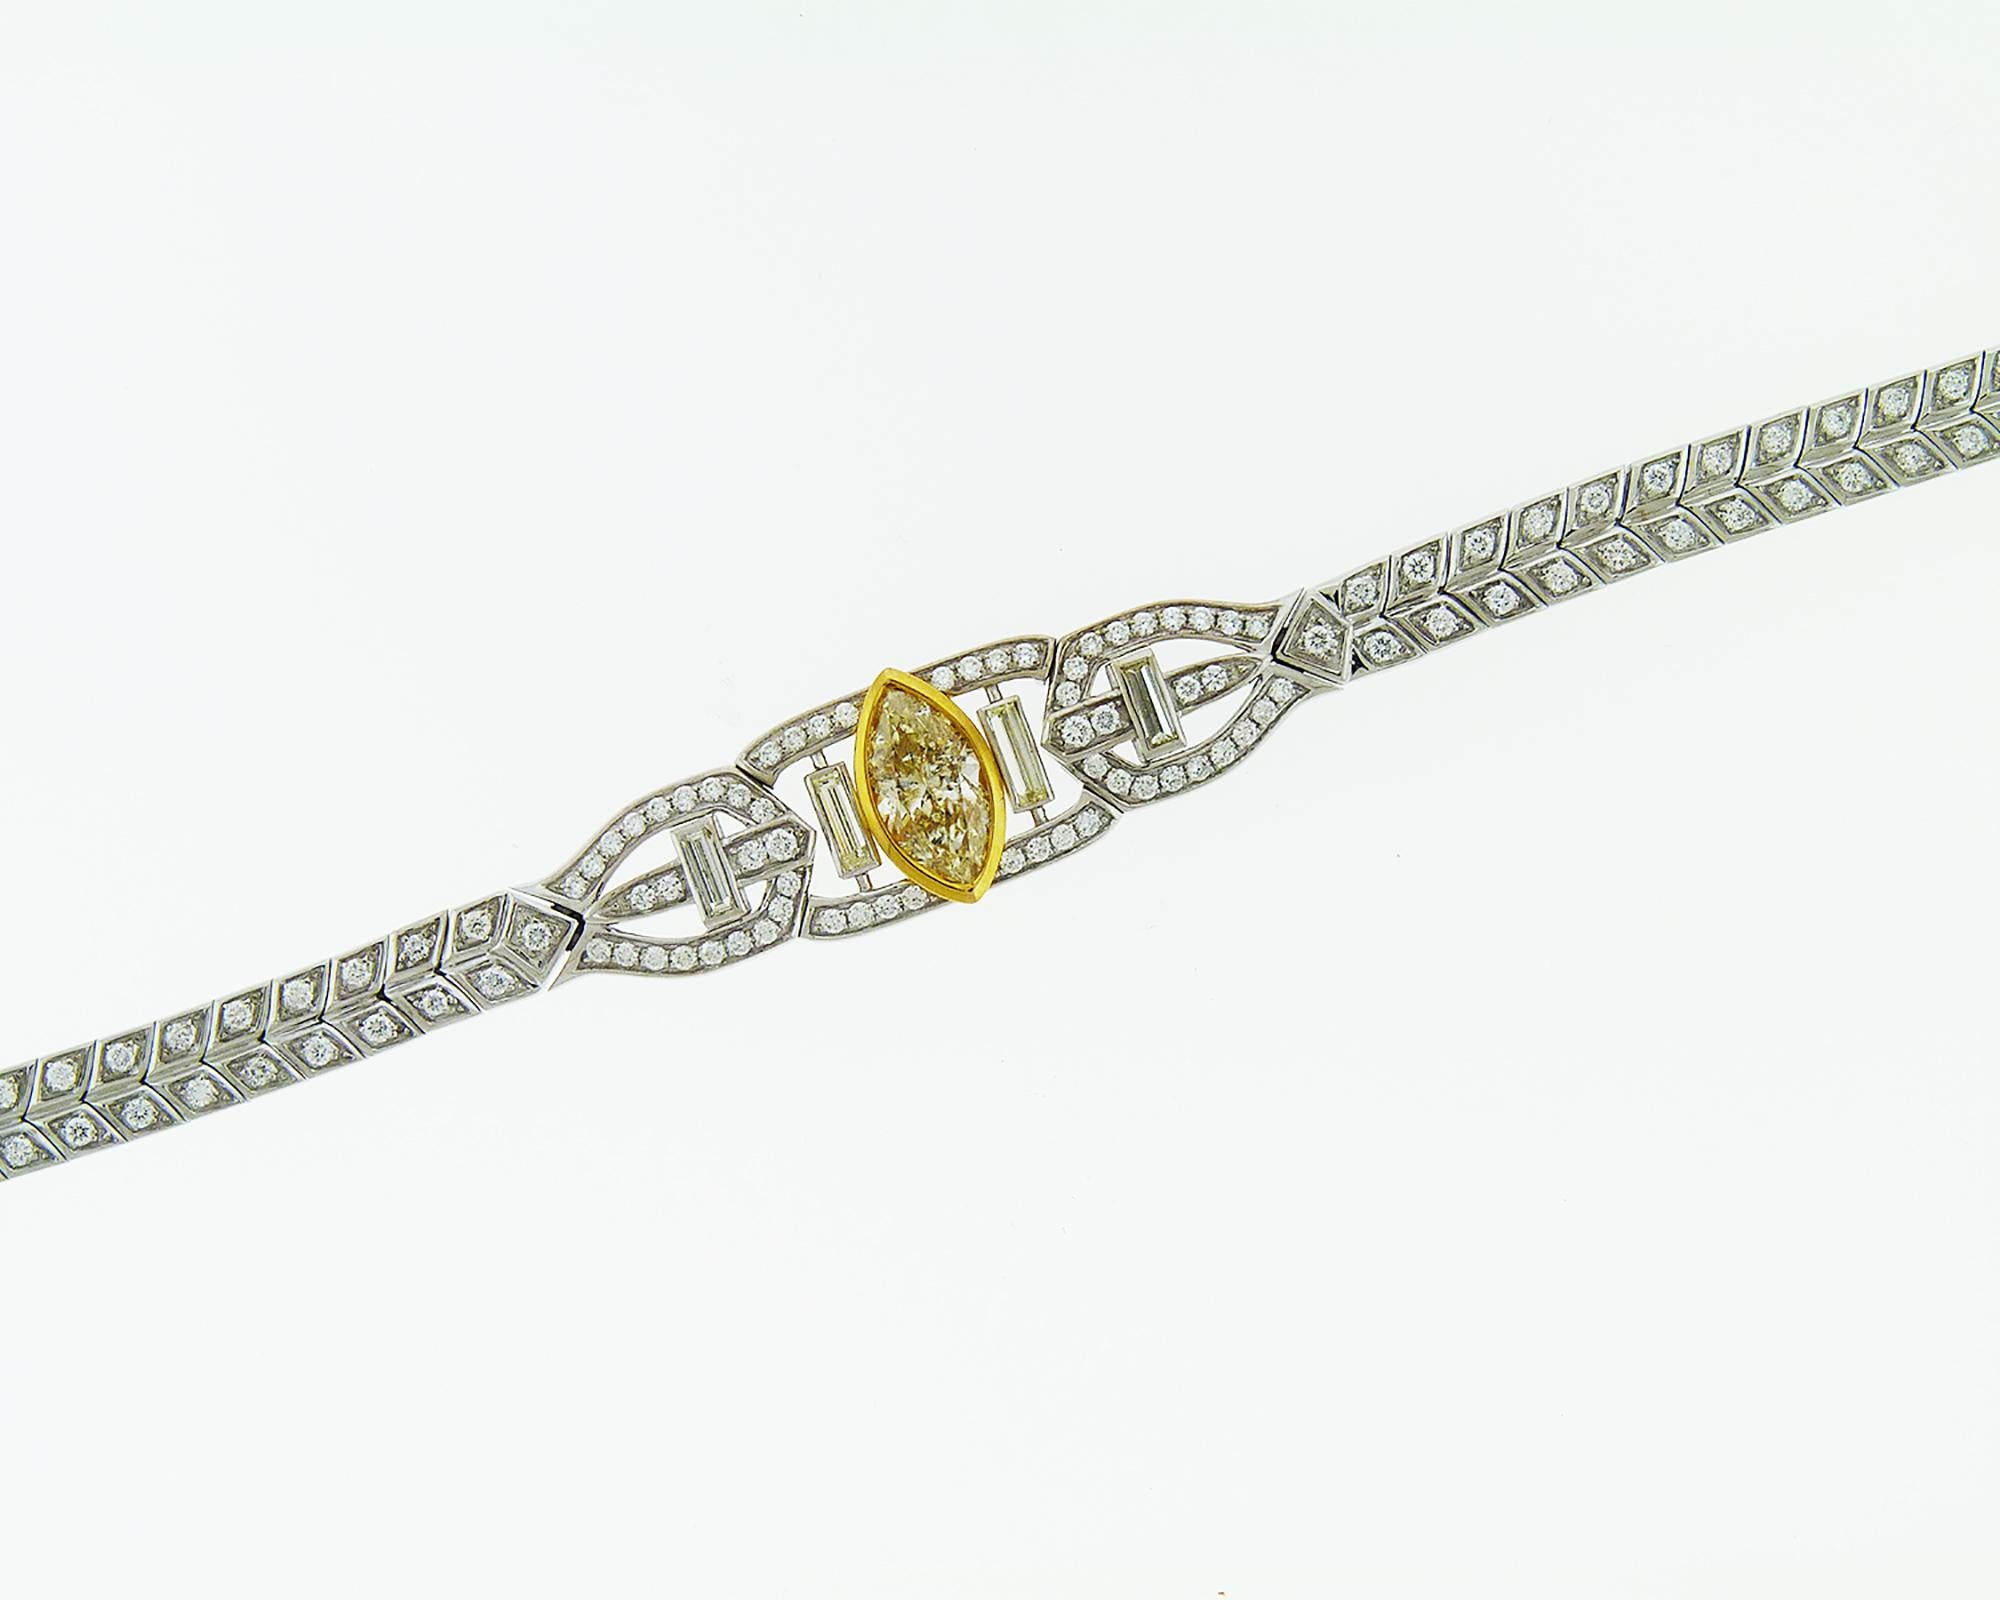 Beautiful bracelet embellished with the fancy yellow marquise center diamond weighing 1.51 carats total and mixed shape white diamonds weighing 2.00 carats total. The bracelet is made in white and yellow 18K gold.

The white diamonds are equivalent